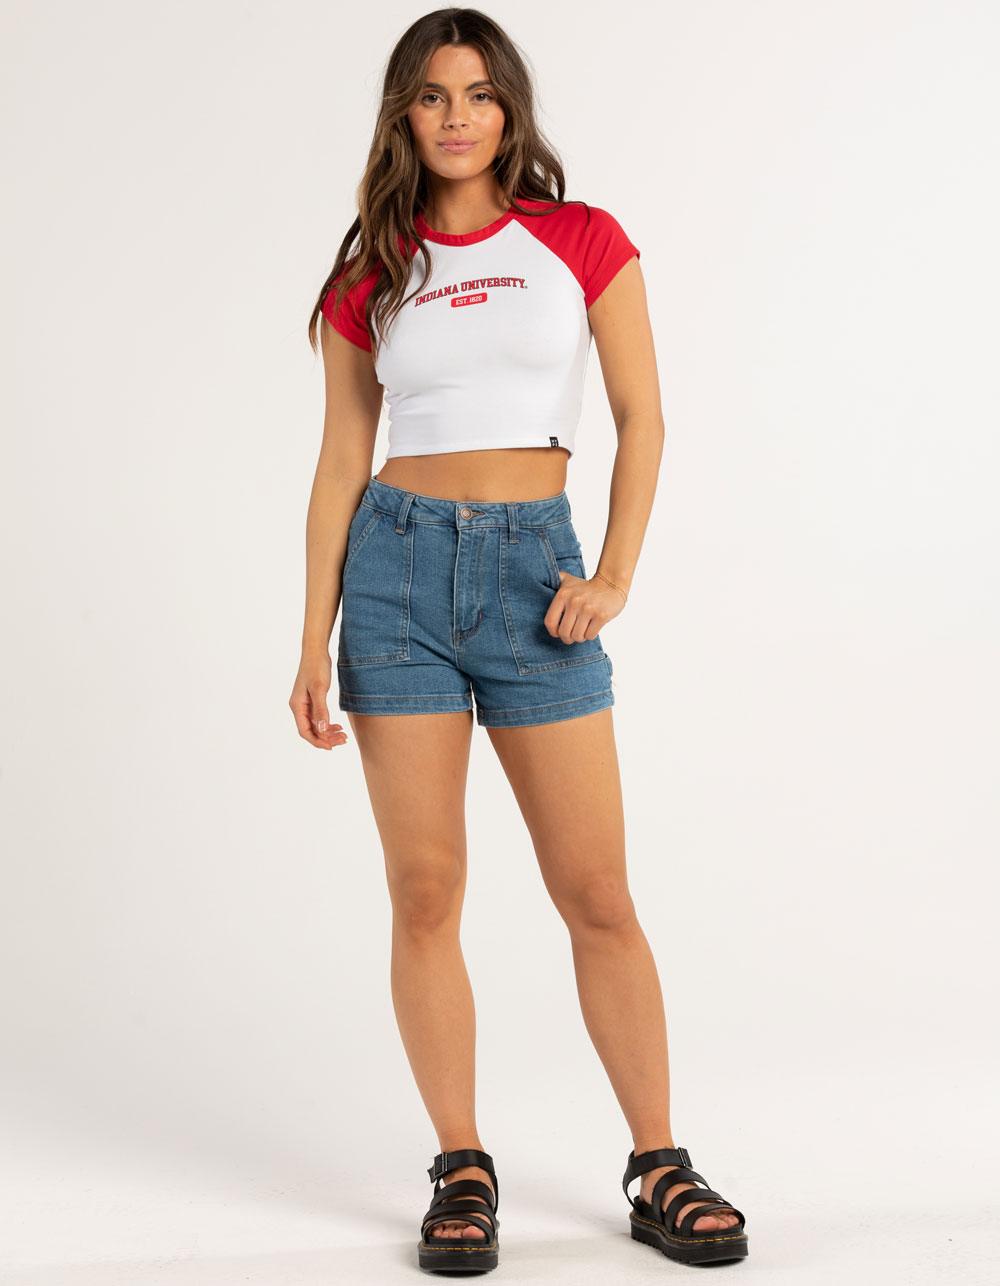 HYPE AND VICE Indiana University Womens Raglan Tee - WHT/RED | Tillys